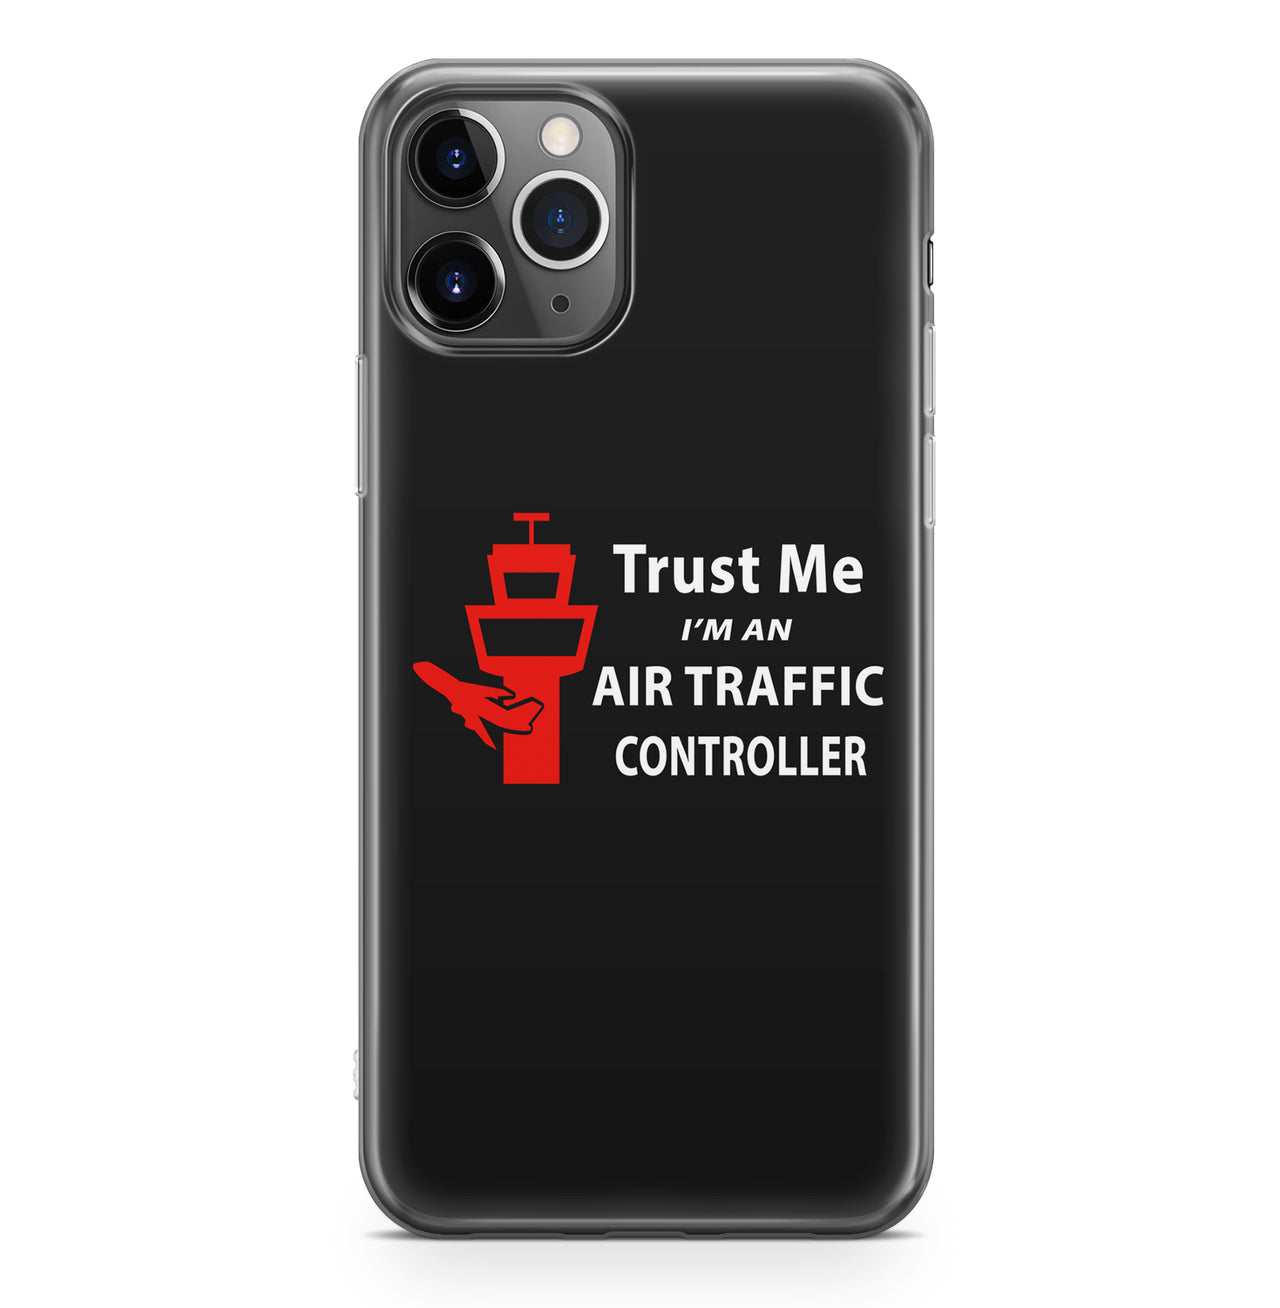 Trust Me I'm an Air Traffic Controller Designed iPhone Cases